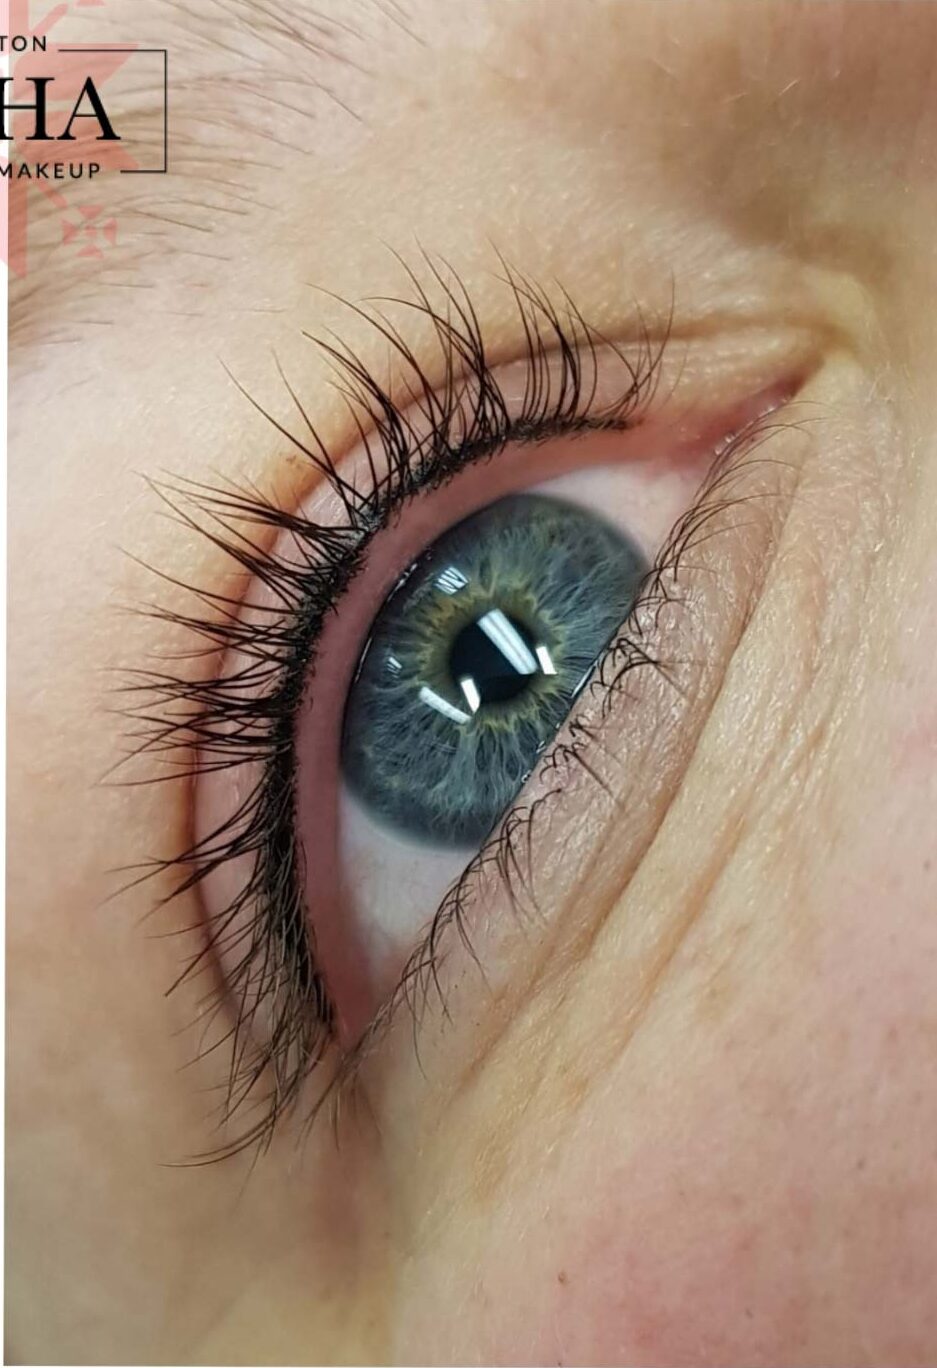 LashLine Cosmetic Tattoo. Cosmetic and Mediical Tattoo by Dasha. Permanent makeup and reconstructive tattoo, scalp micro-pigmentation in Christchurch, New Zealand